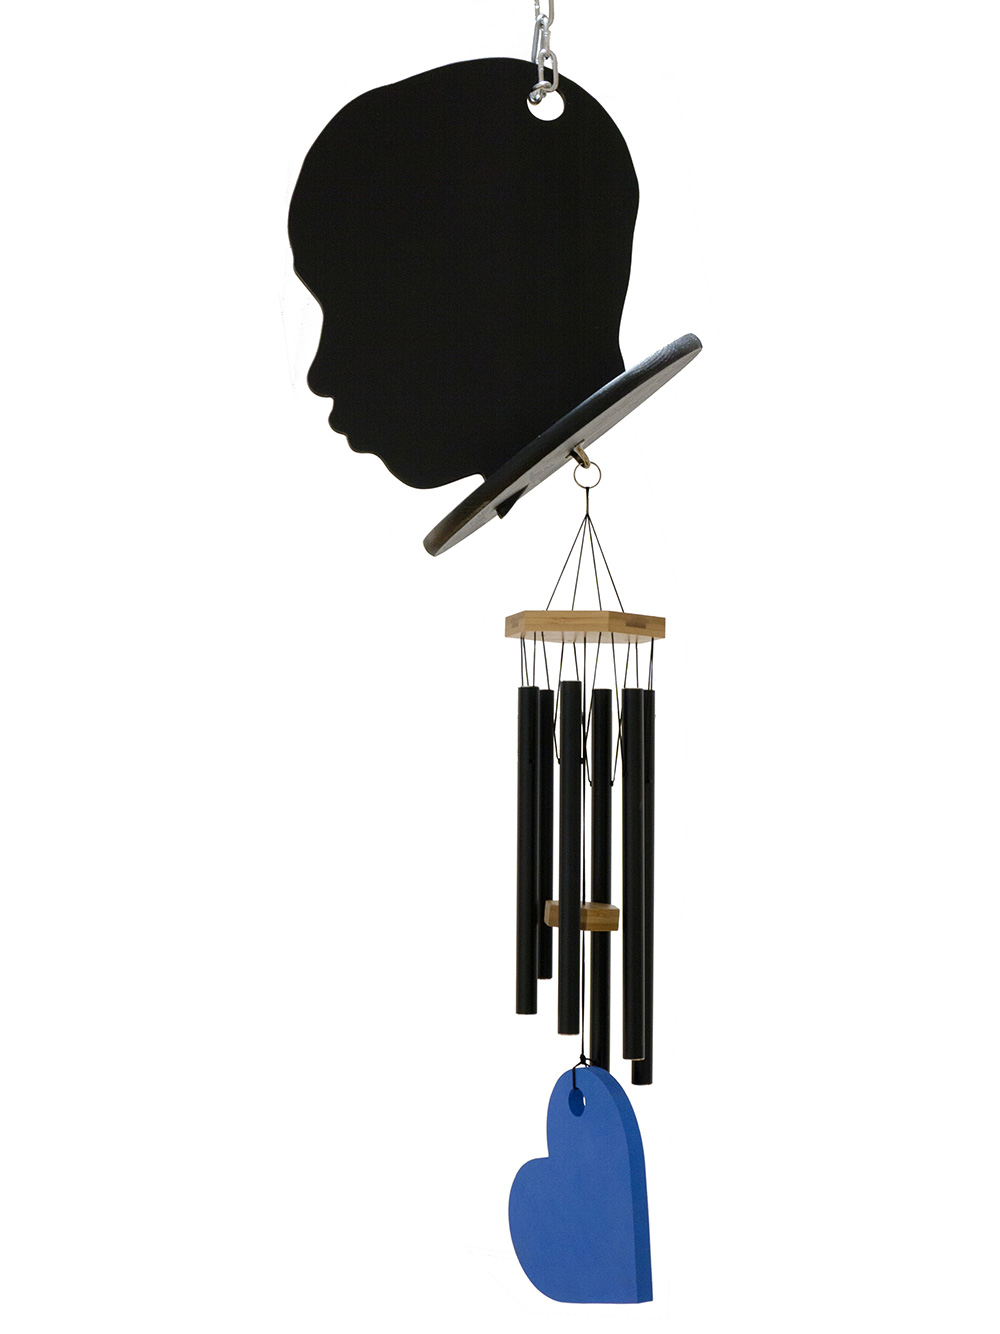 Kevin Demery: Untitled (Wind Chime)